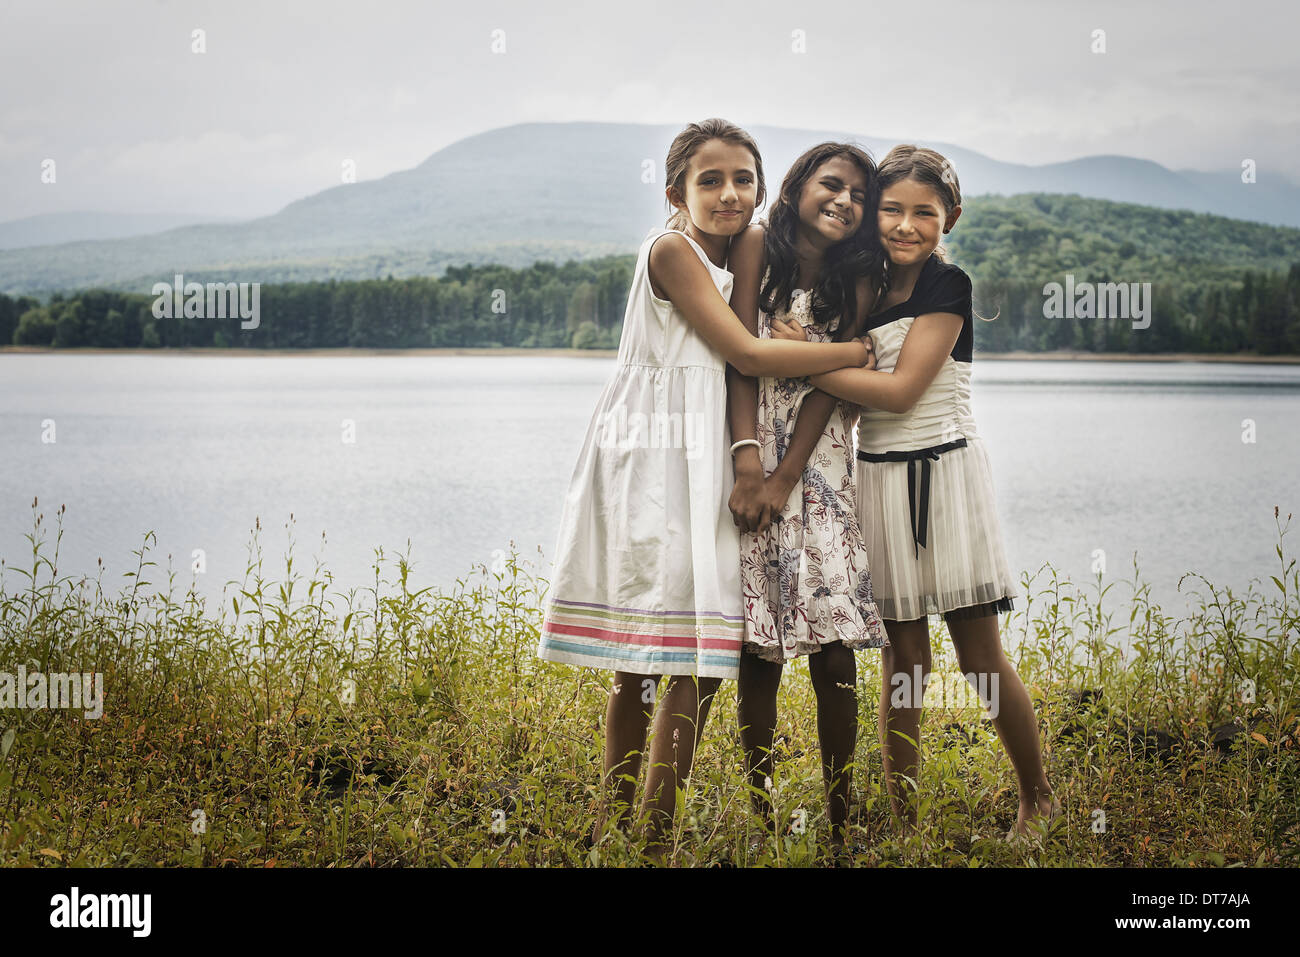 Three young girls standing by the side of a lake hugging each other Woodstock New York USA Stock Photo